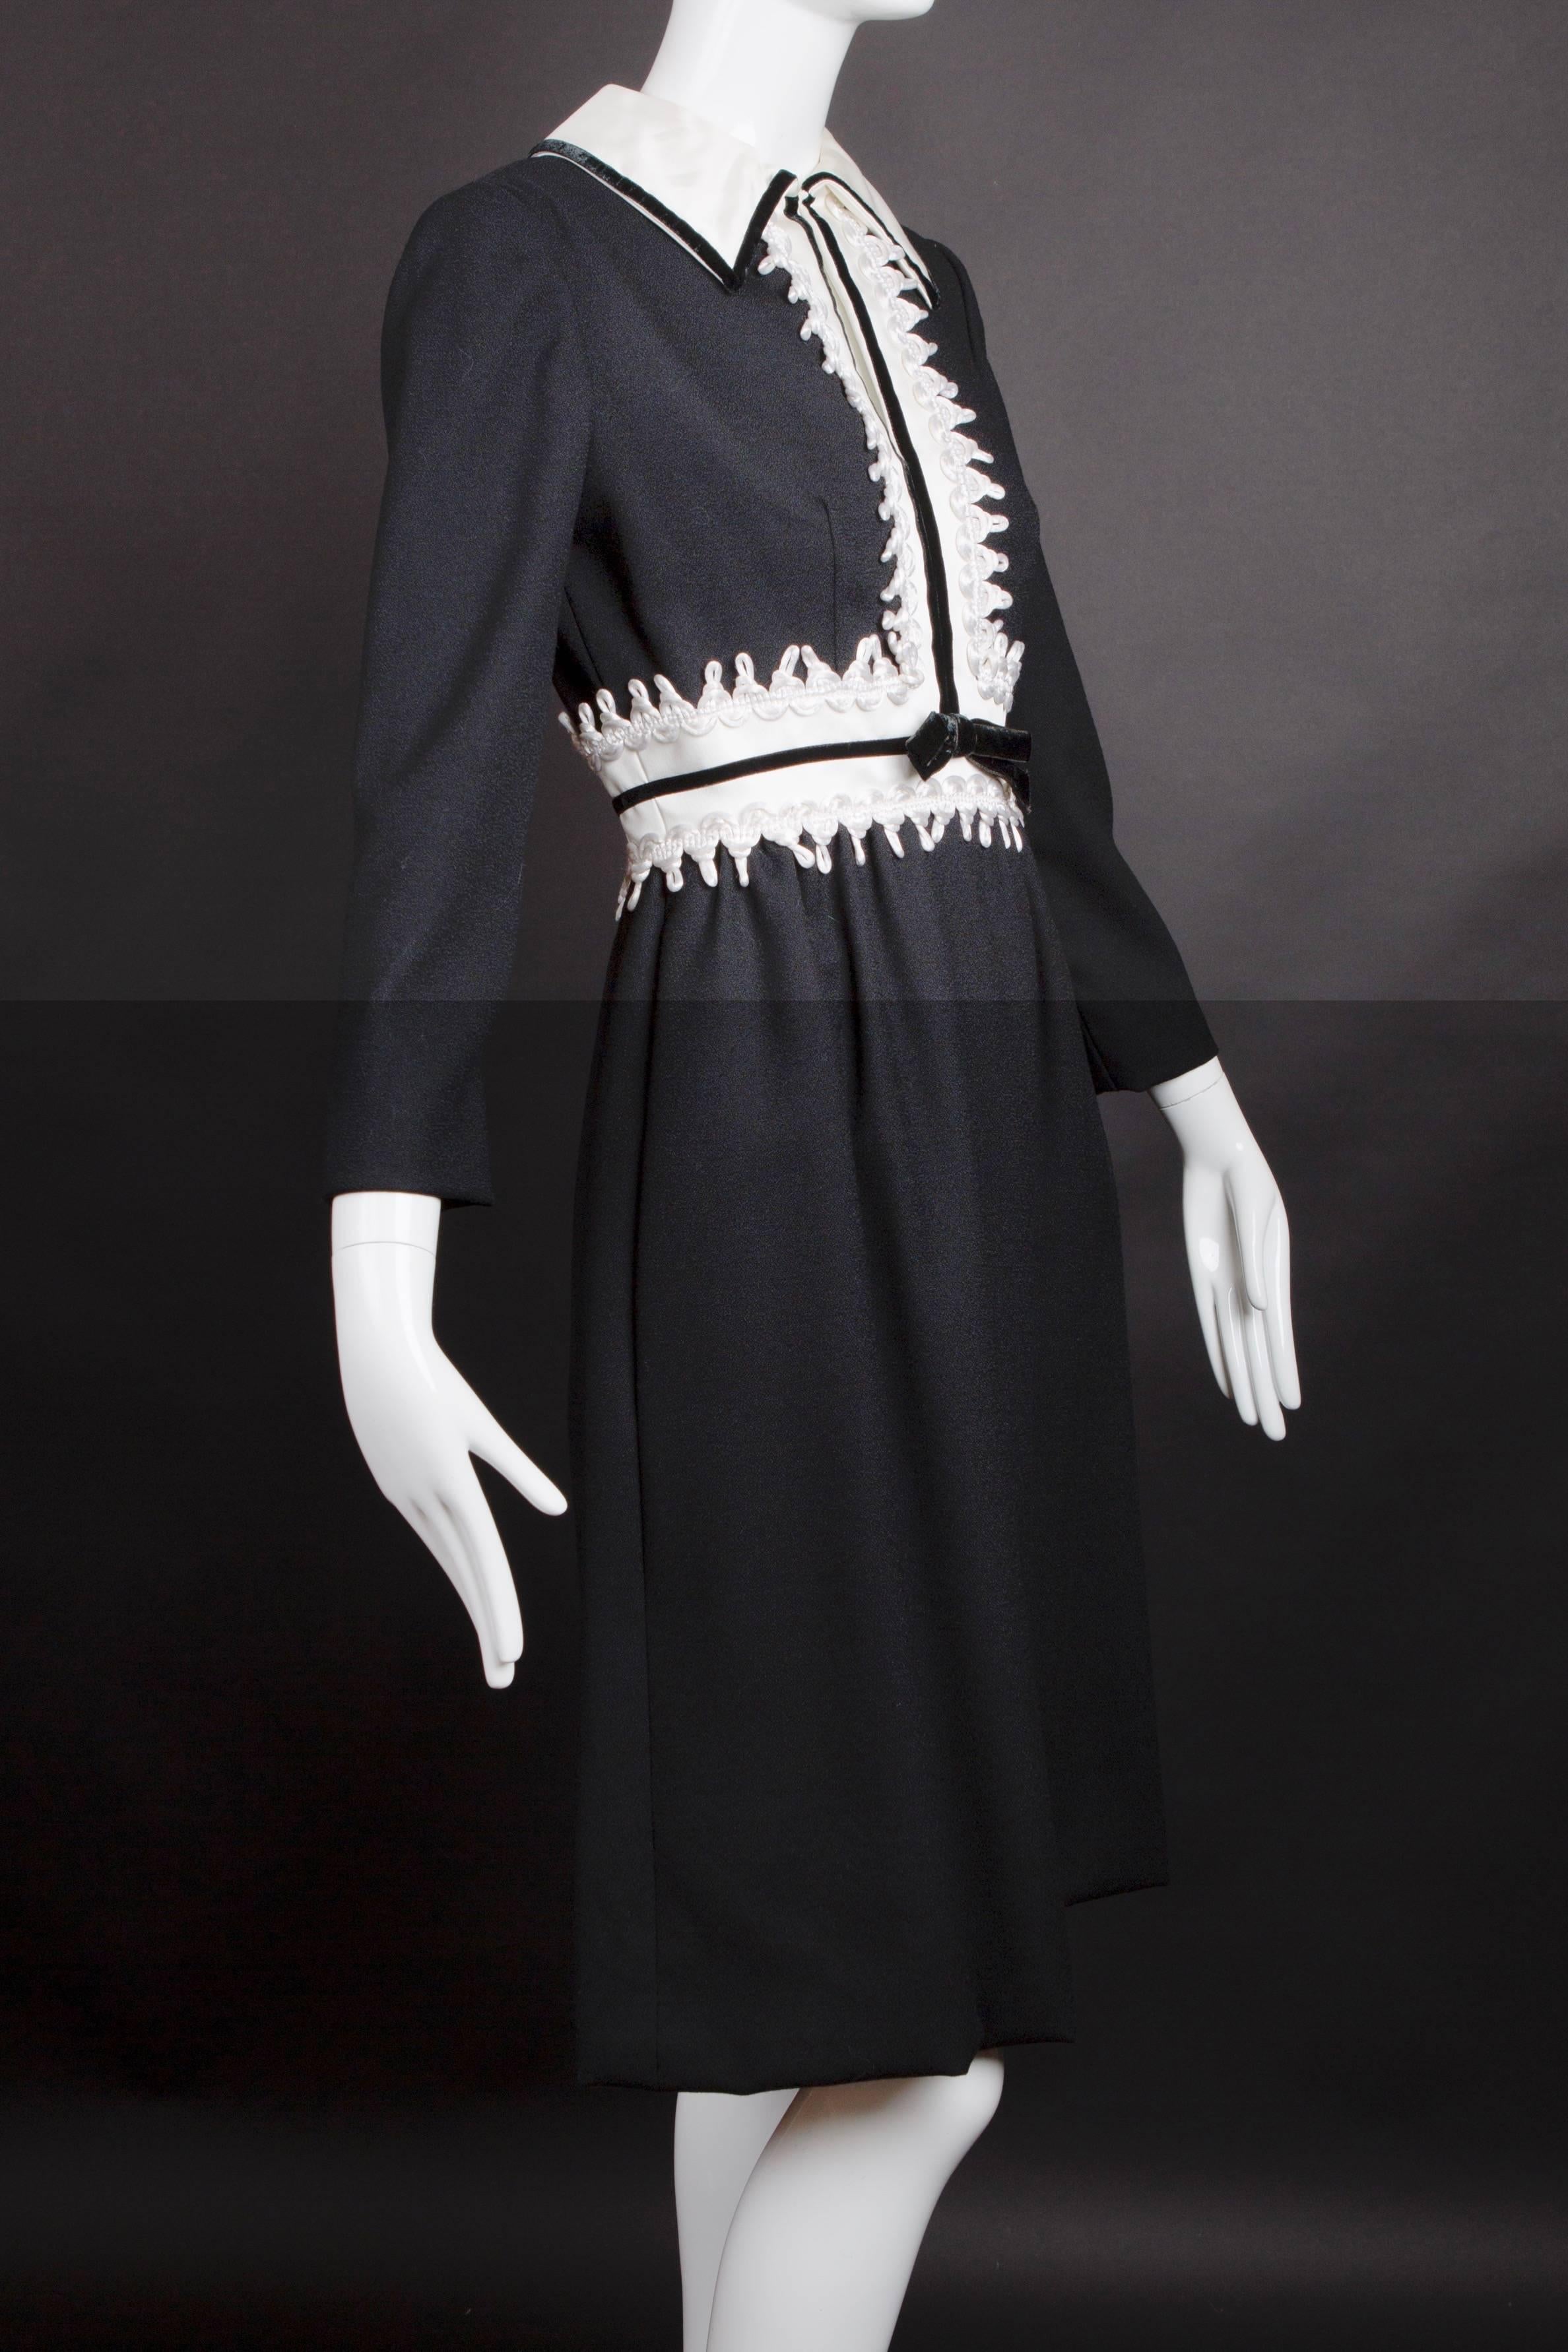 Adorable late 1960s dress in a black wool crepe with an appliqué waist and center front panels in white satin trimmed in white loop cord. Black velvet ribbon edges the collar, center front and waistline seam. The dress is dart fitted from the bust